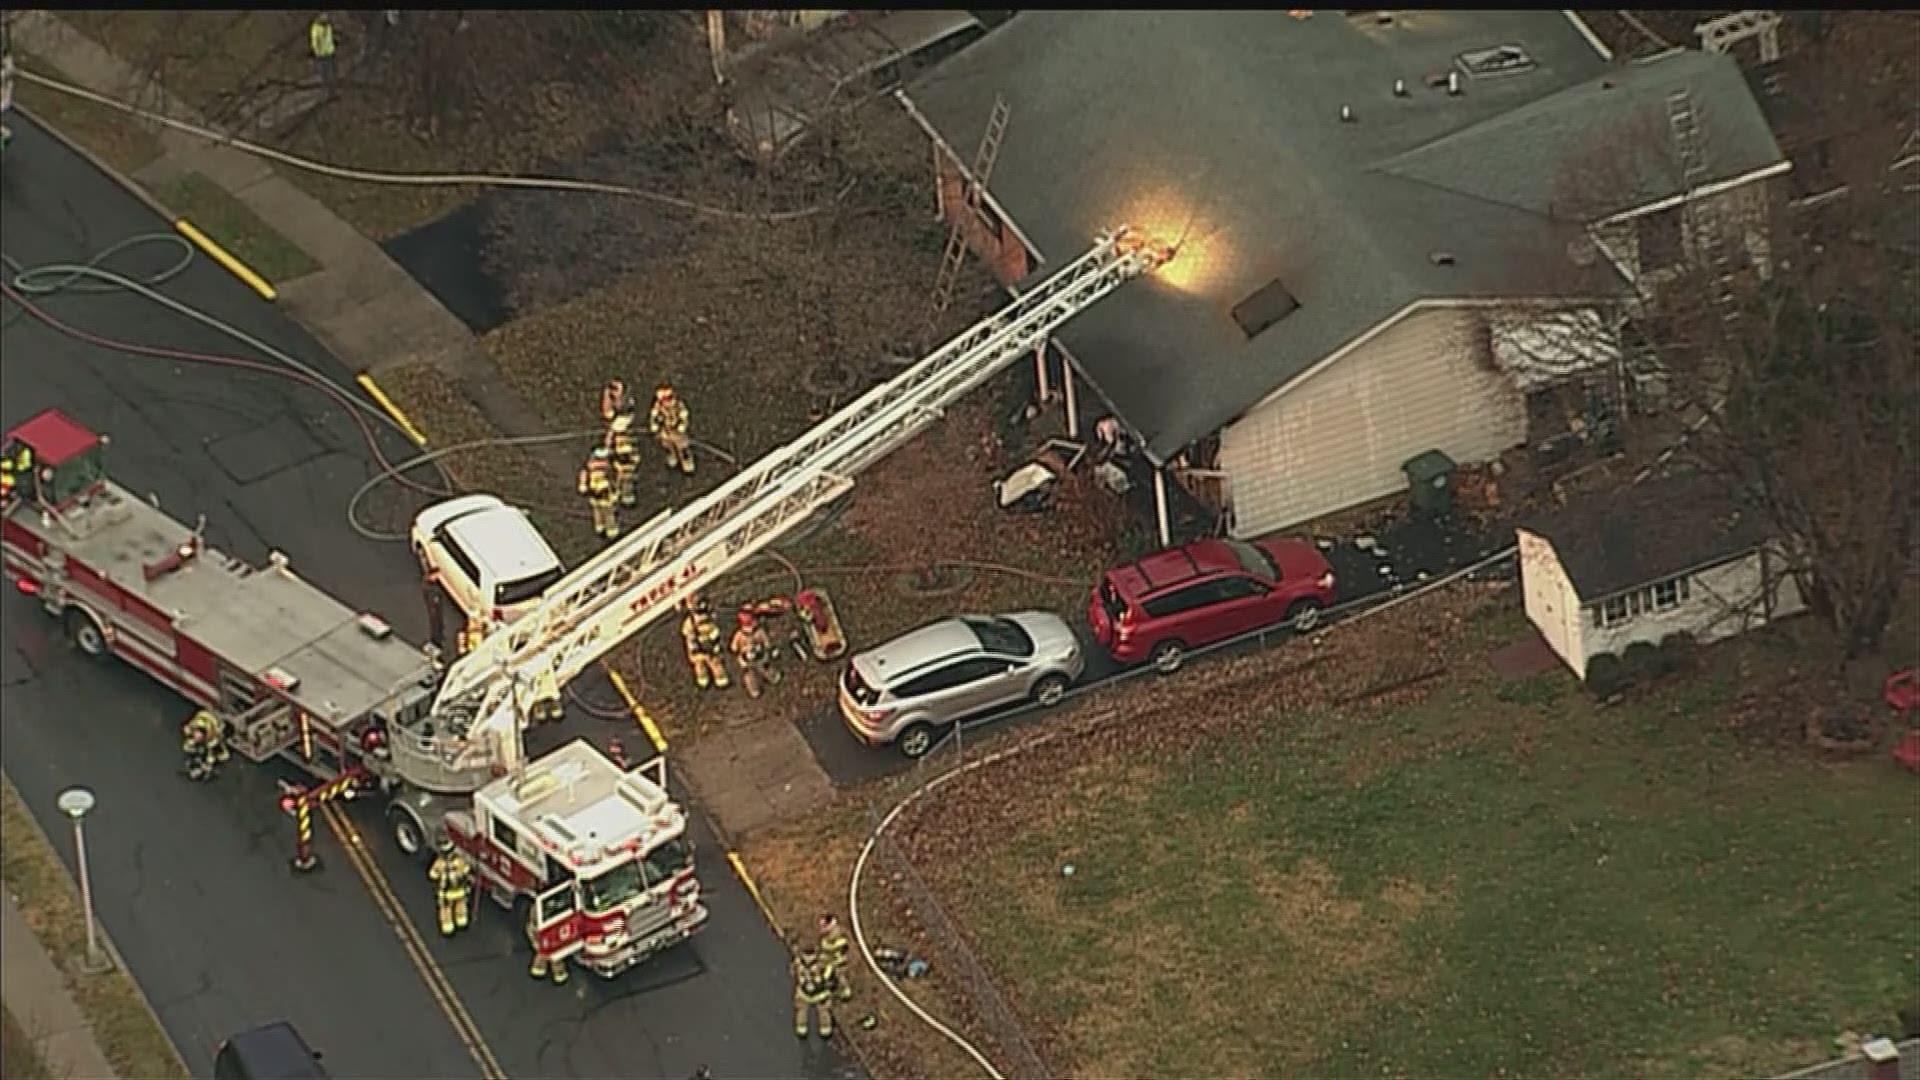 Two people were rescued unconscious from a house fire in Frederick County, Maryland on Tuesday morning.